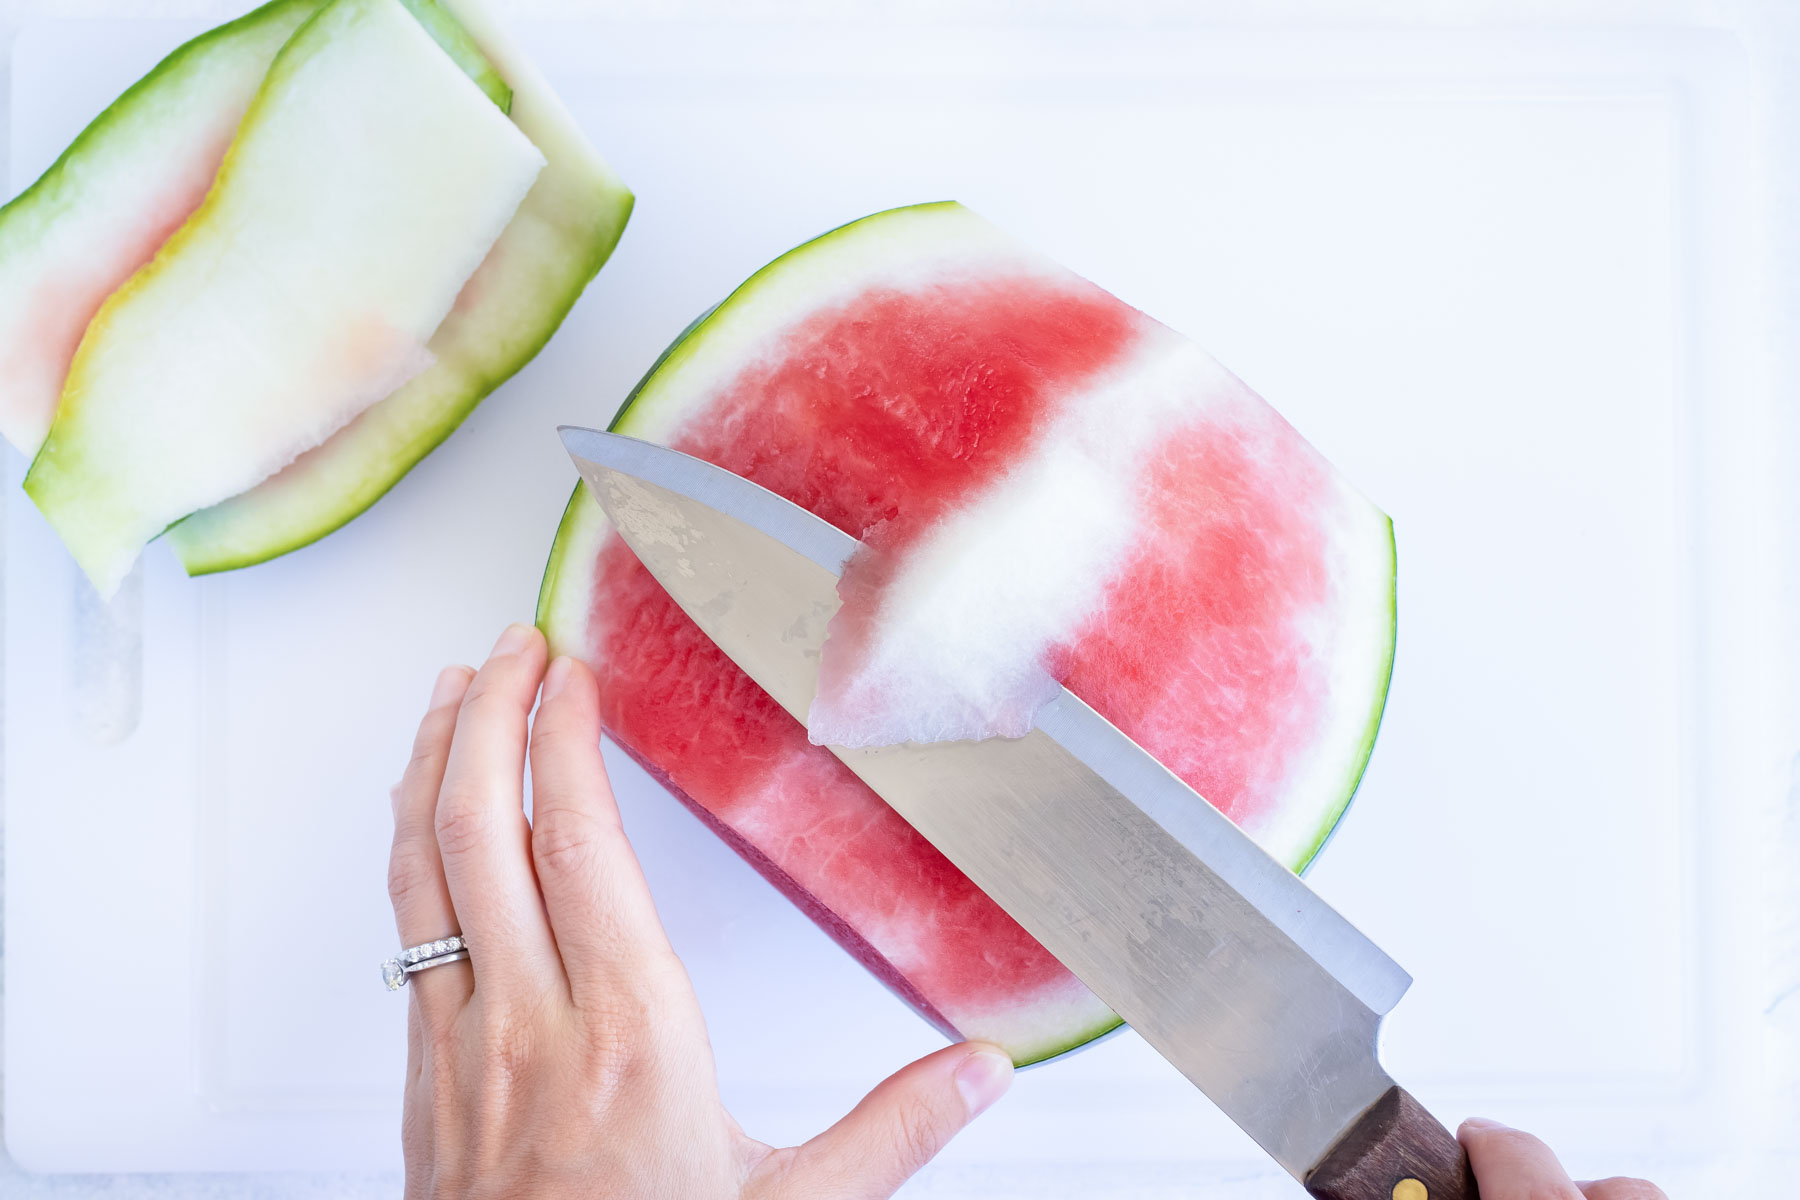 Removing the white rind of the watermelon after removing the outside